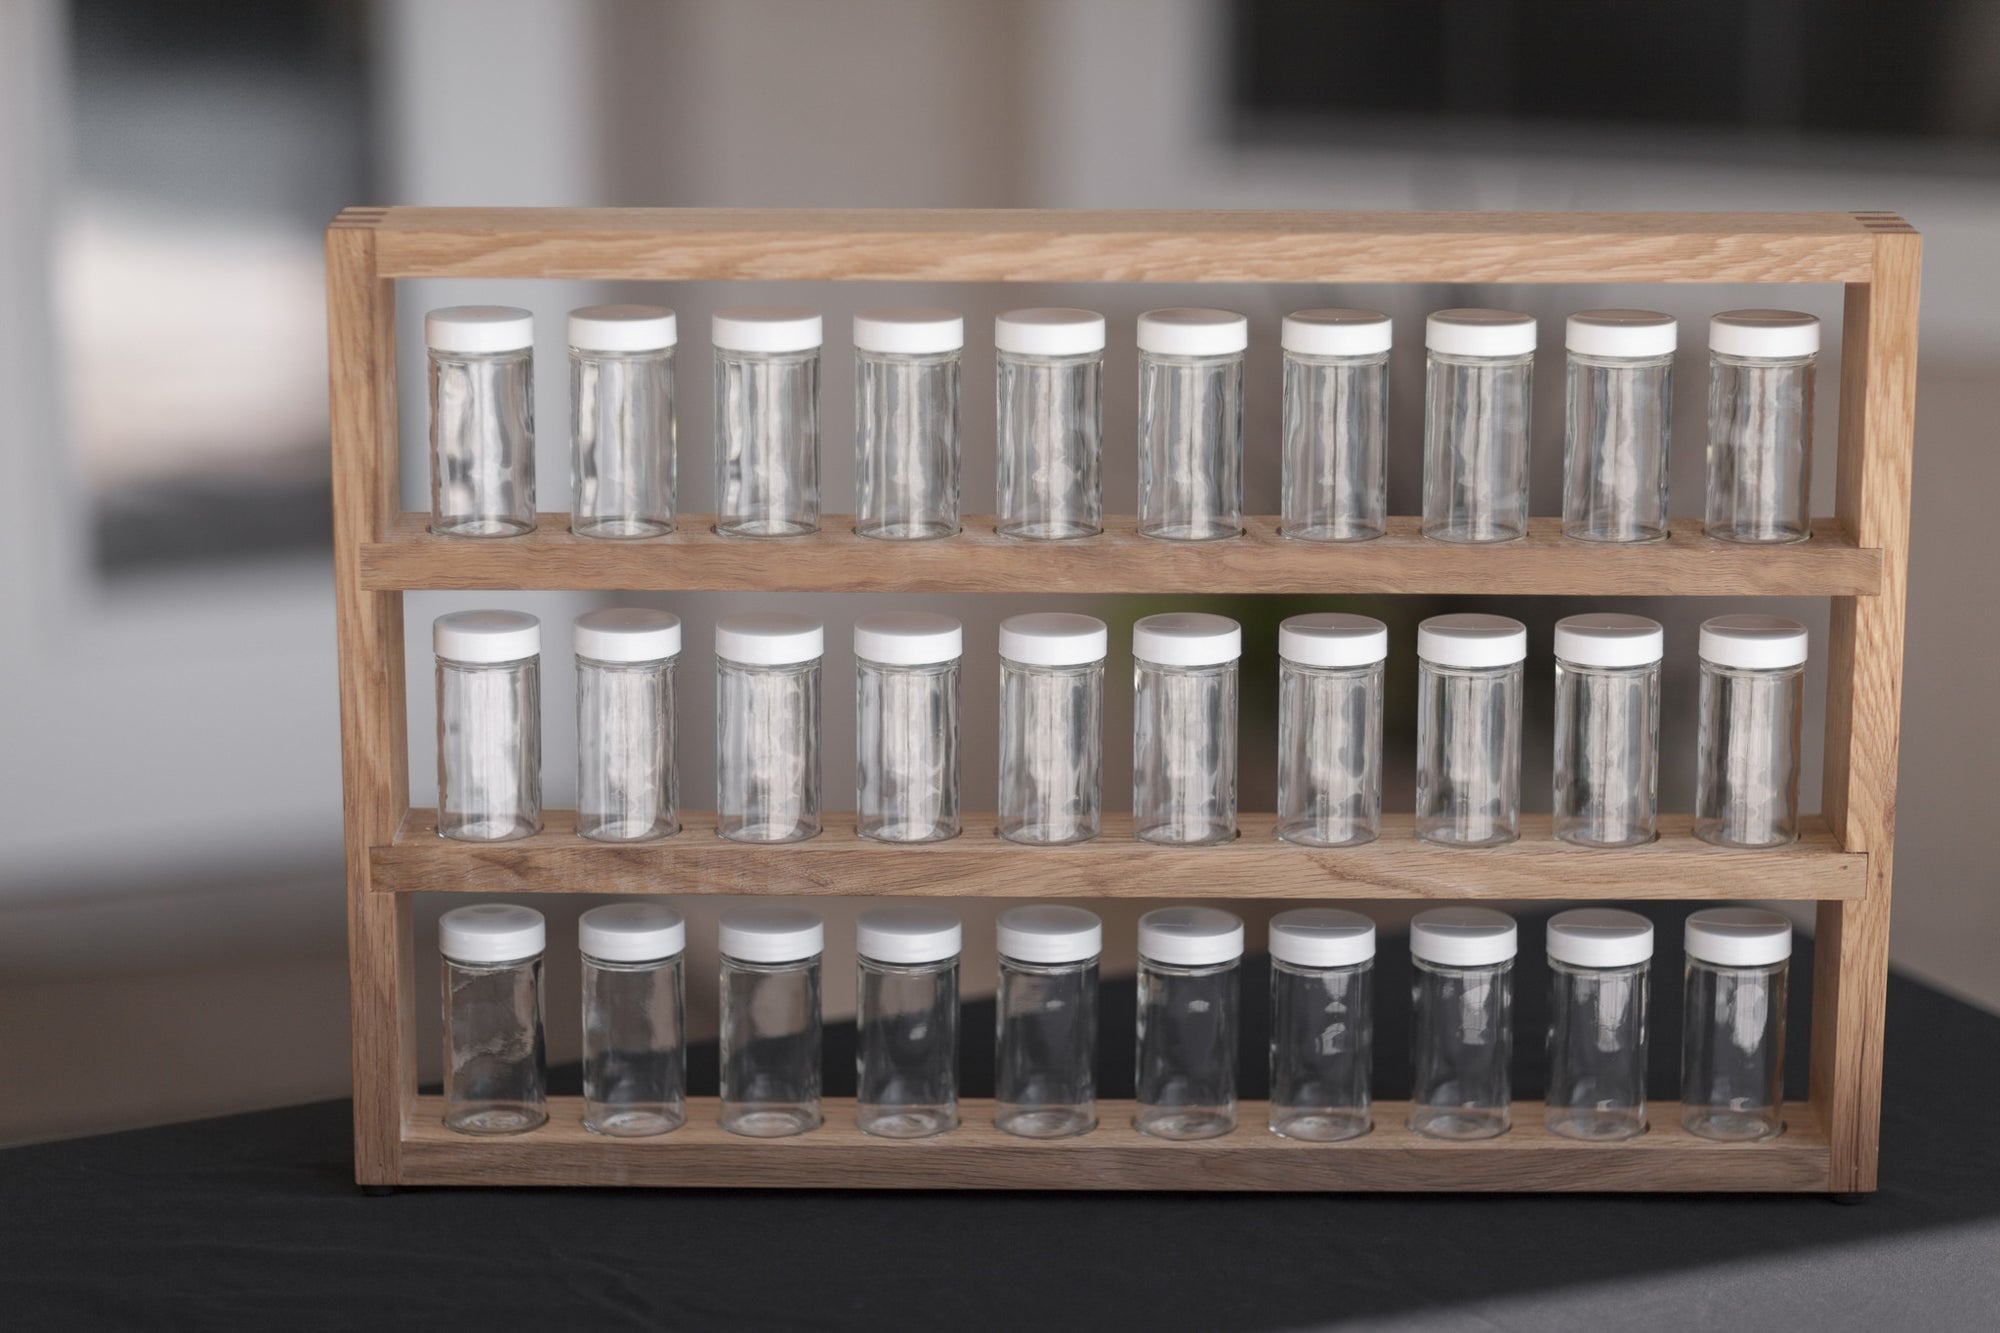 The Functional Spice Rack, organizes and simplifies...